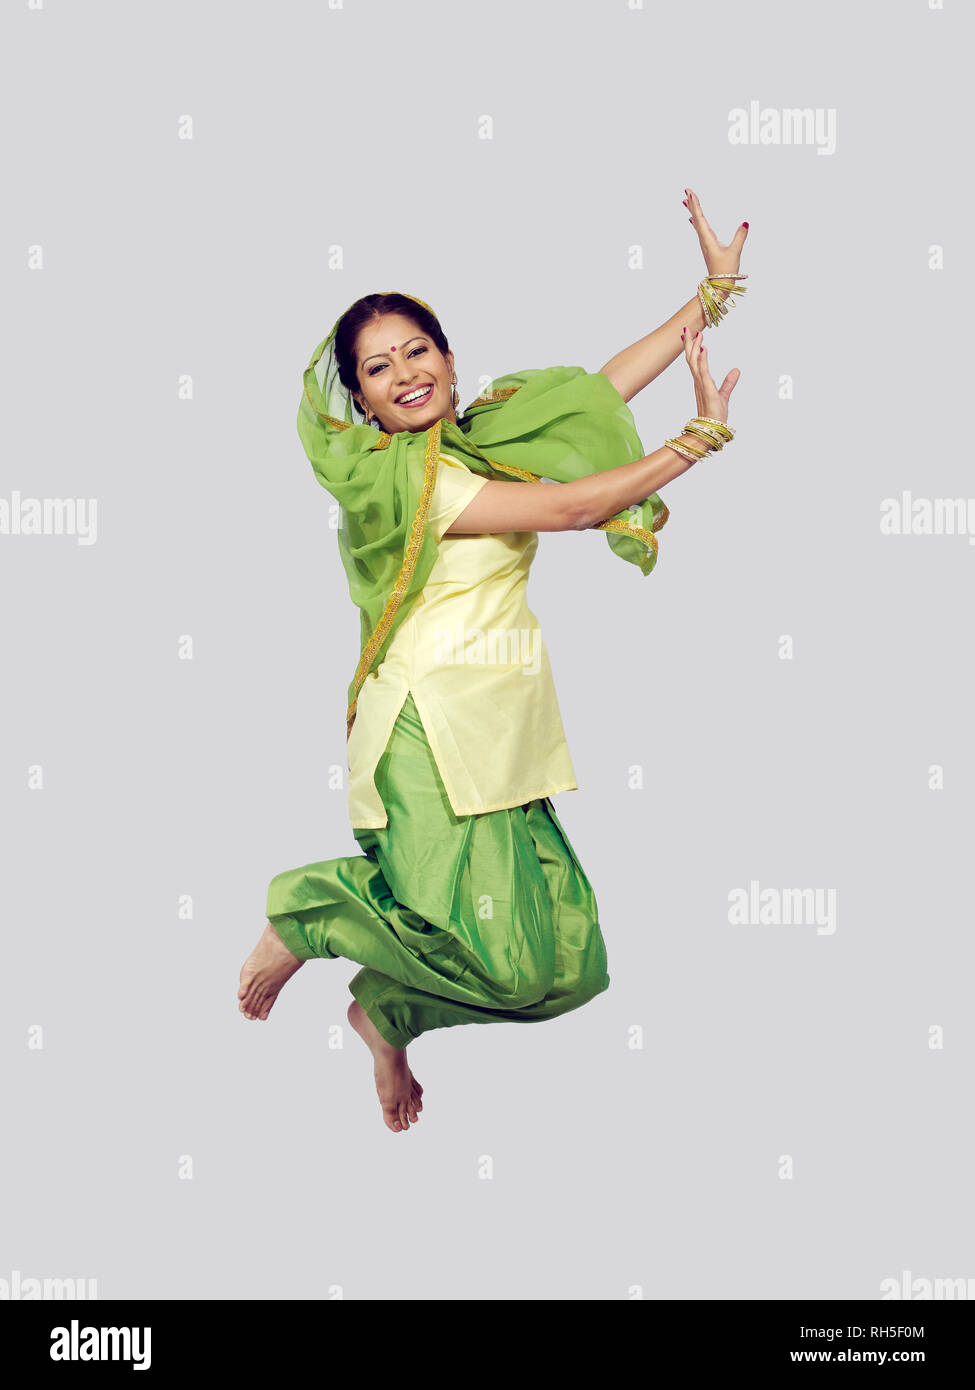 PORTRAIT OF A SARDARNI, SIKH WOMAN JUMPING DANCING THE BHANGRA Stock Photo